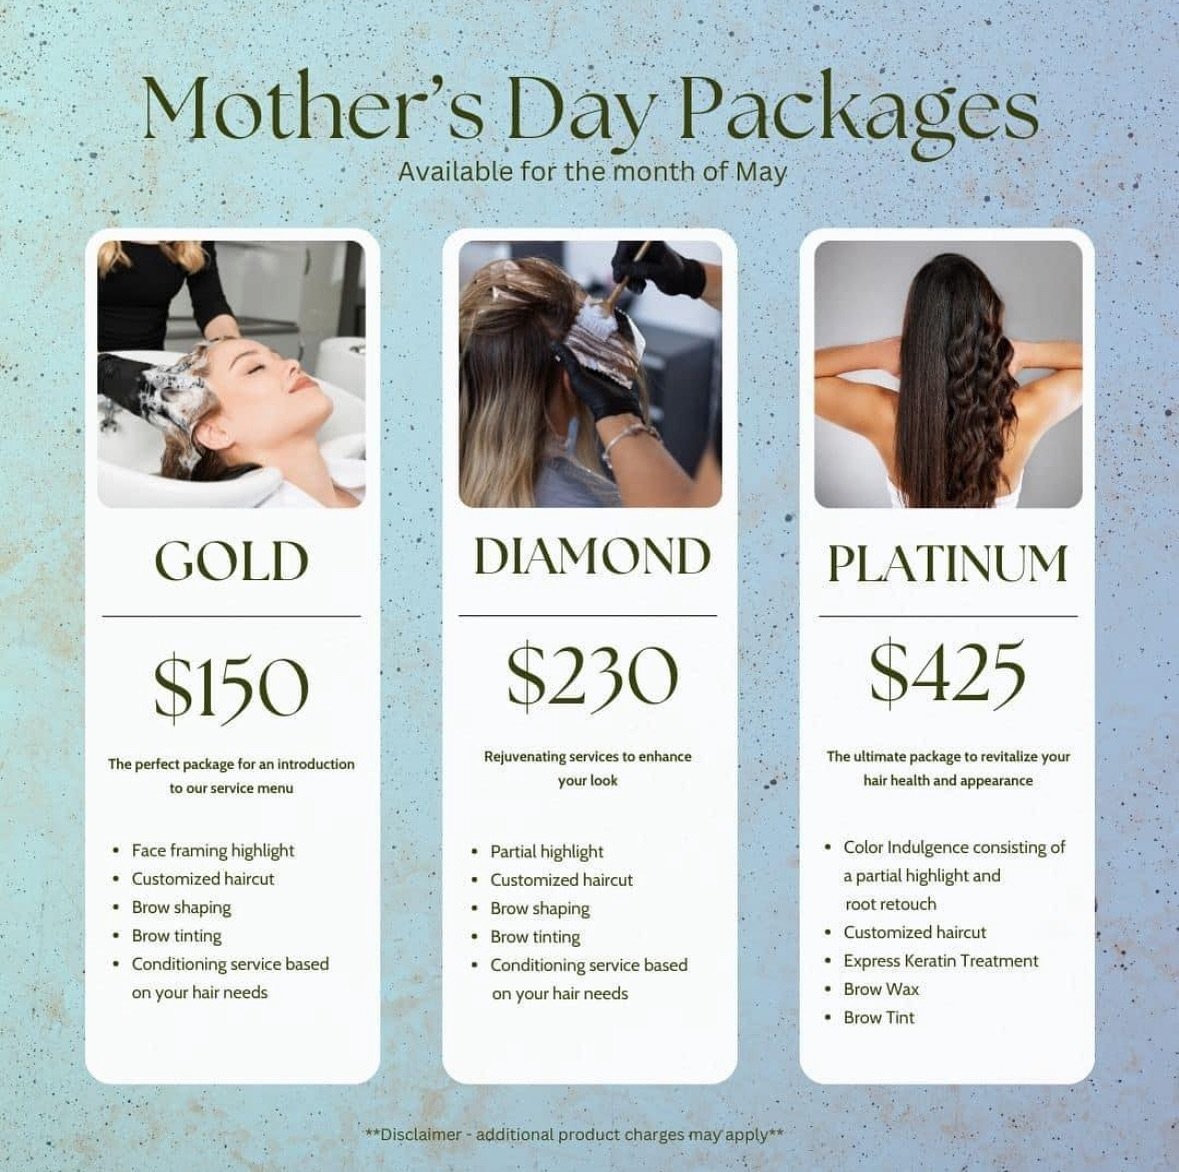 Treat yourself or a deserving mom to some pampering this Mother&rsquo;s Day! Because moms deserve a little &lsquo;me&rsquo; time too! 🥰
This service sale lasts through the month of May. 💕

#monthlysavings #dealofthemonth #baltimorehairstylist #mary